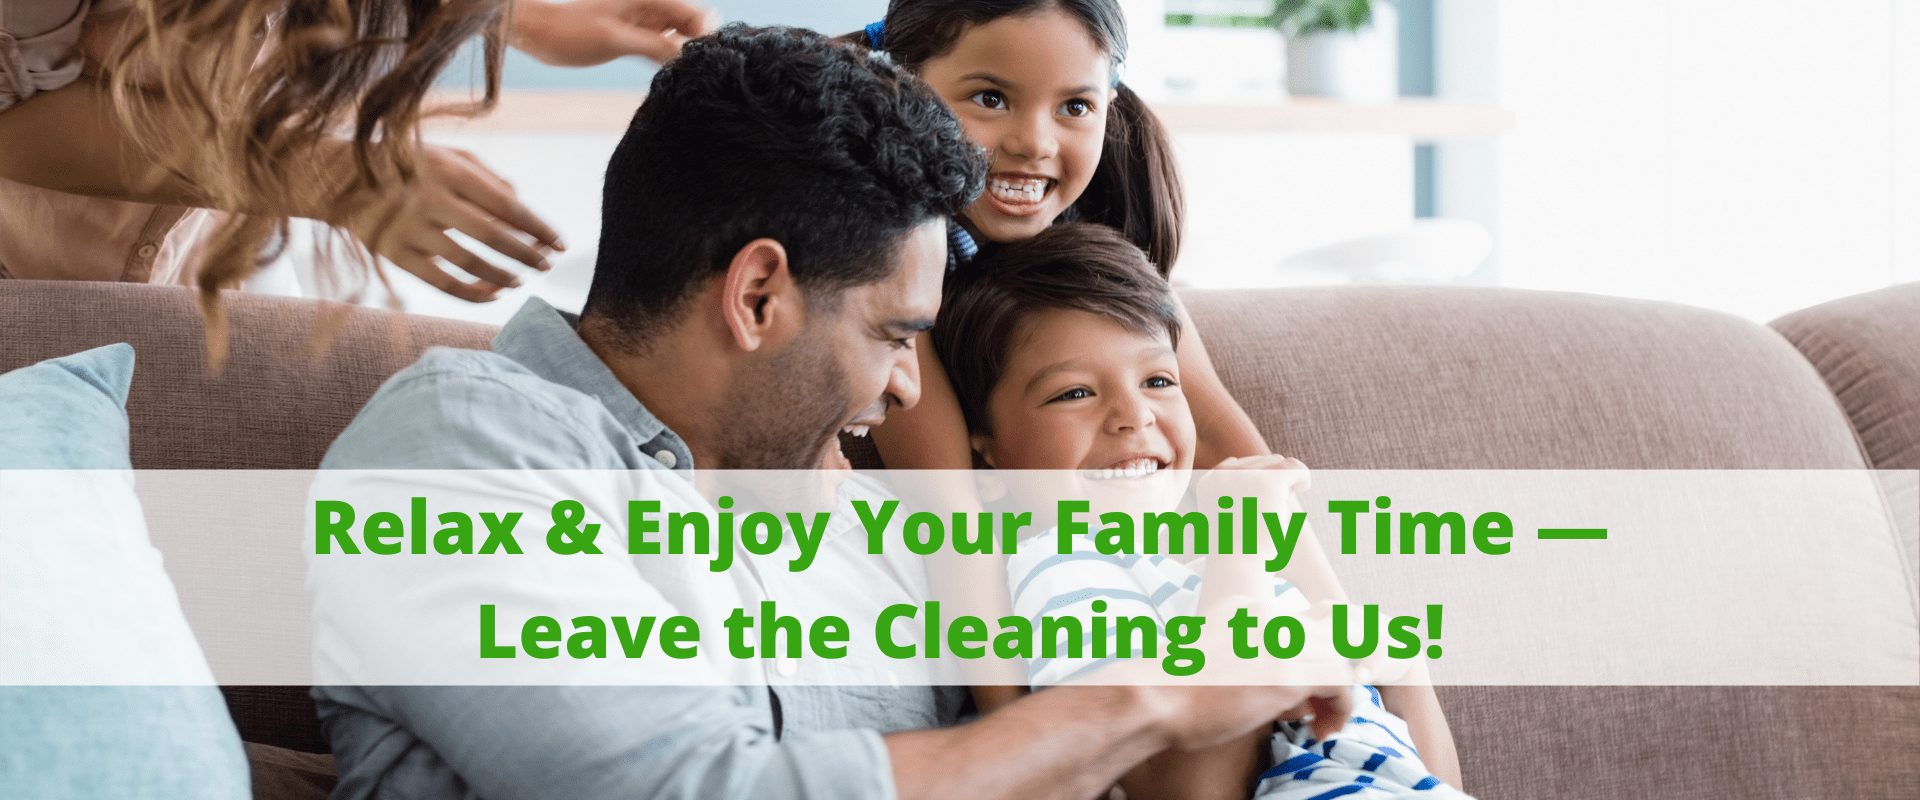 Relax and Enjoy Your Family Time - Leave the Cleaning to Us!